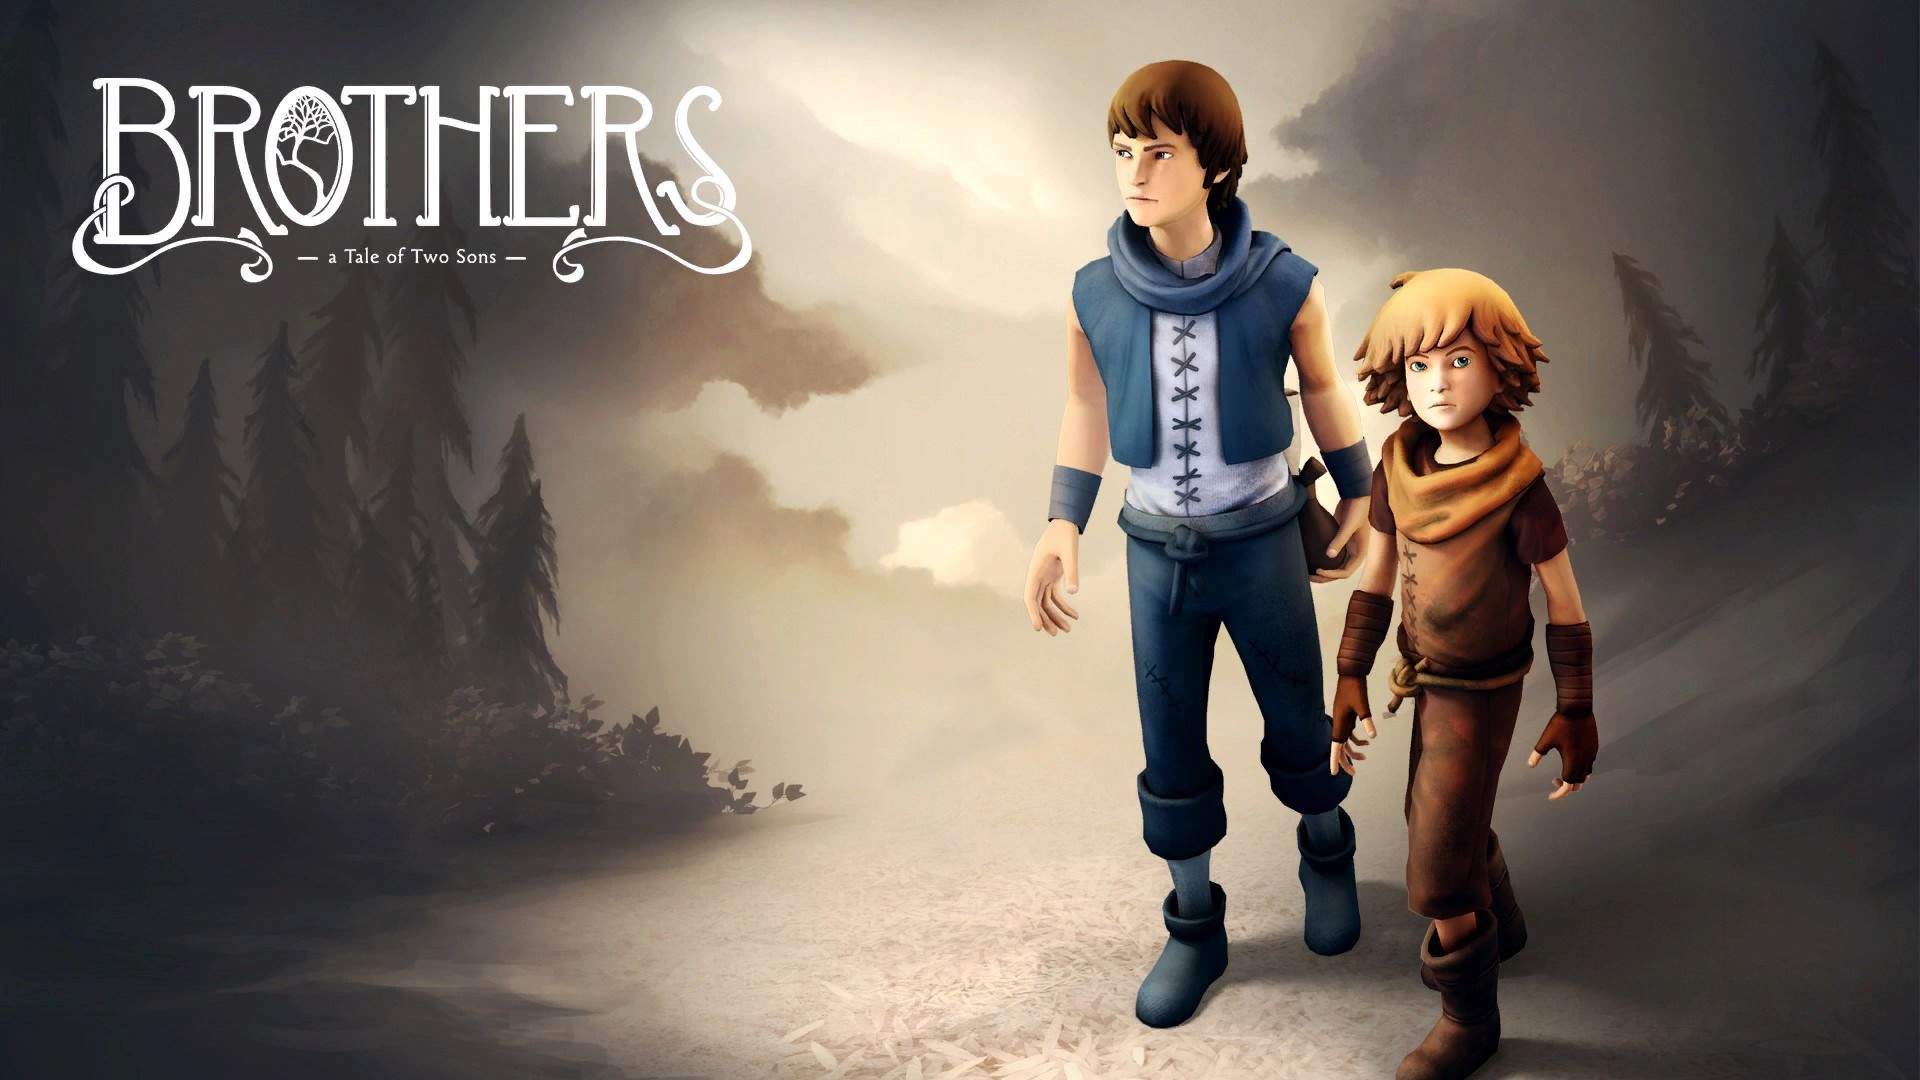 Brothers – A Tale of Two Sons